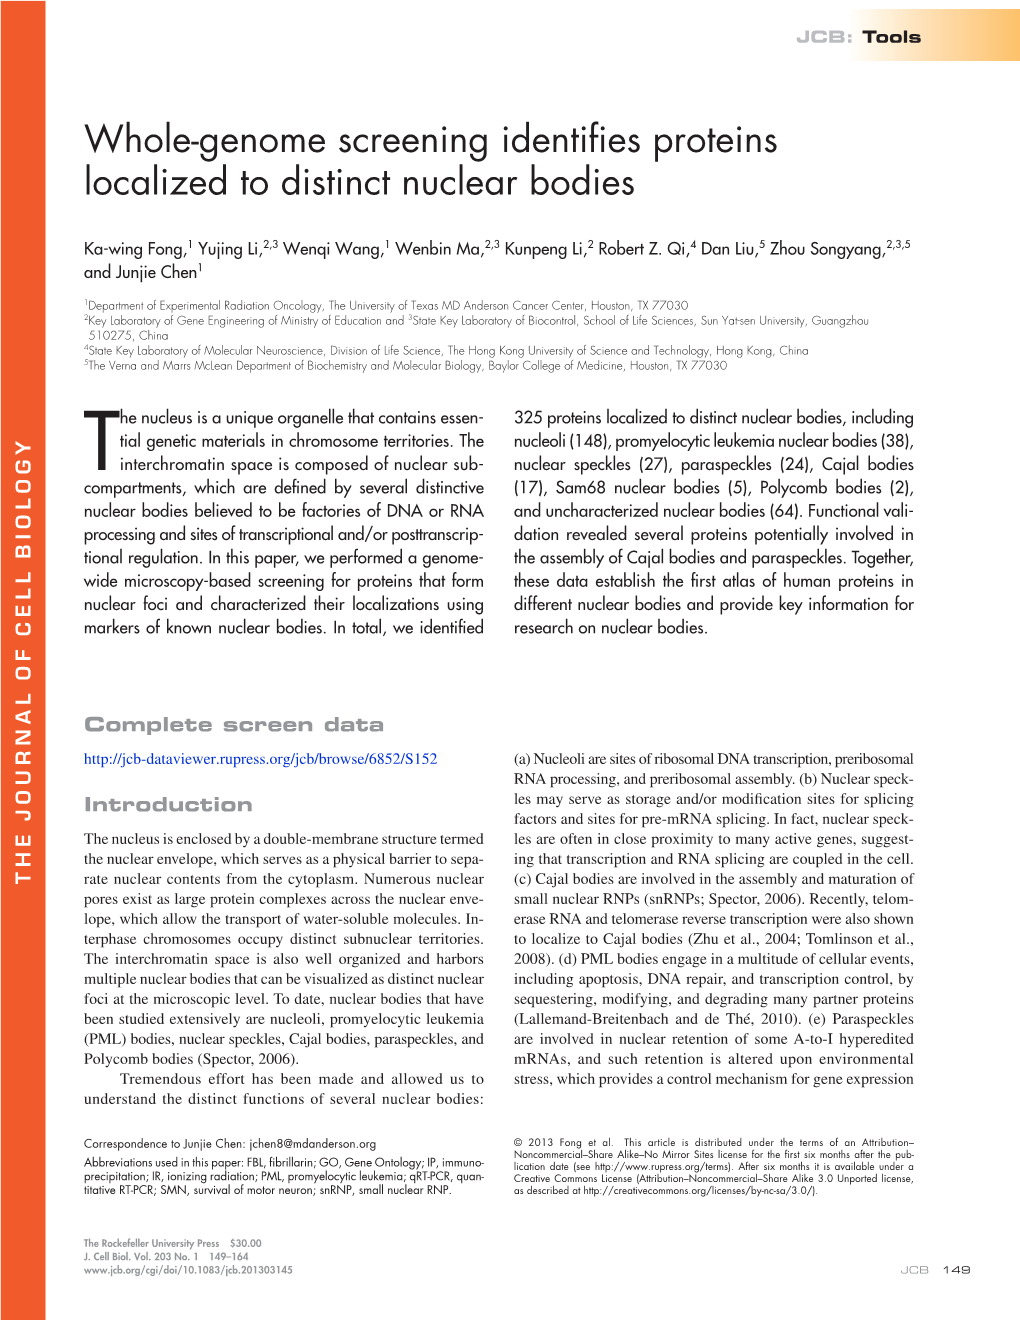 Wholegenome Screening Identifies Proteins Localized to Distinct Nuclear Bodies